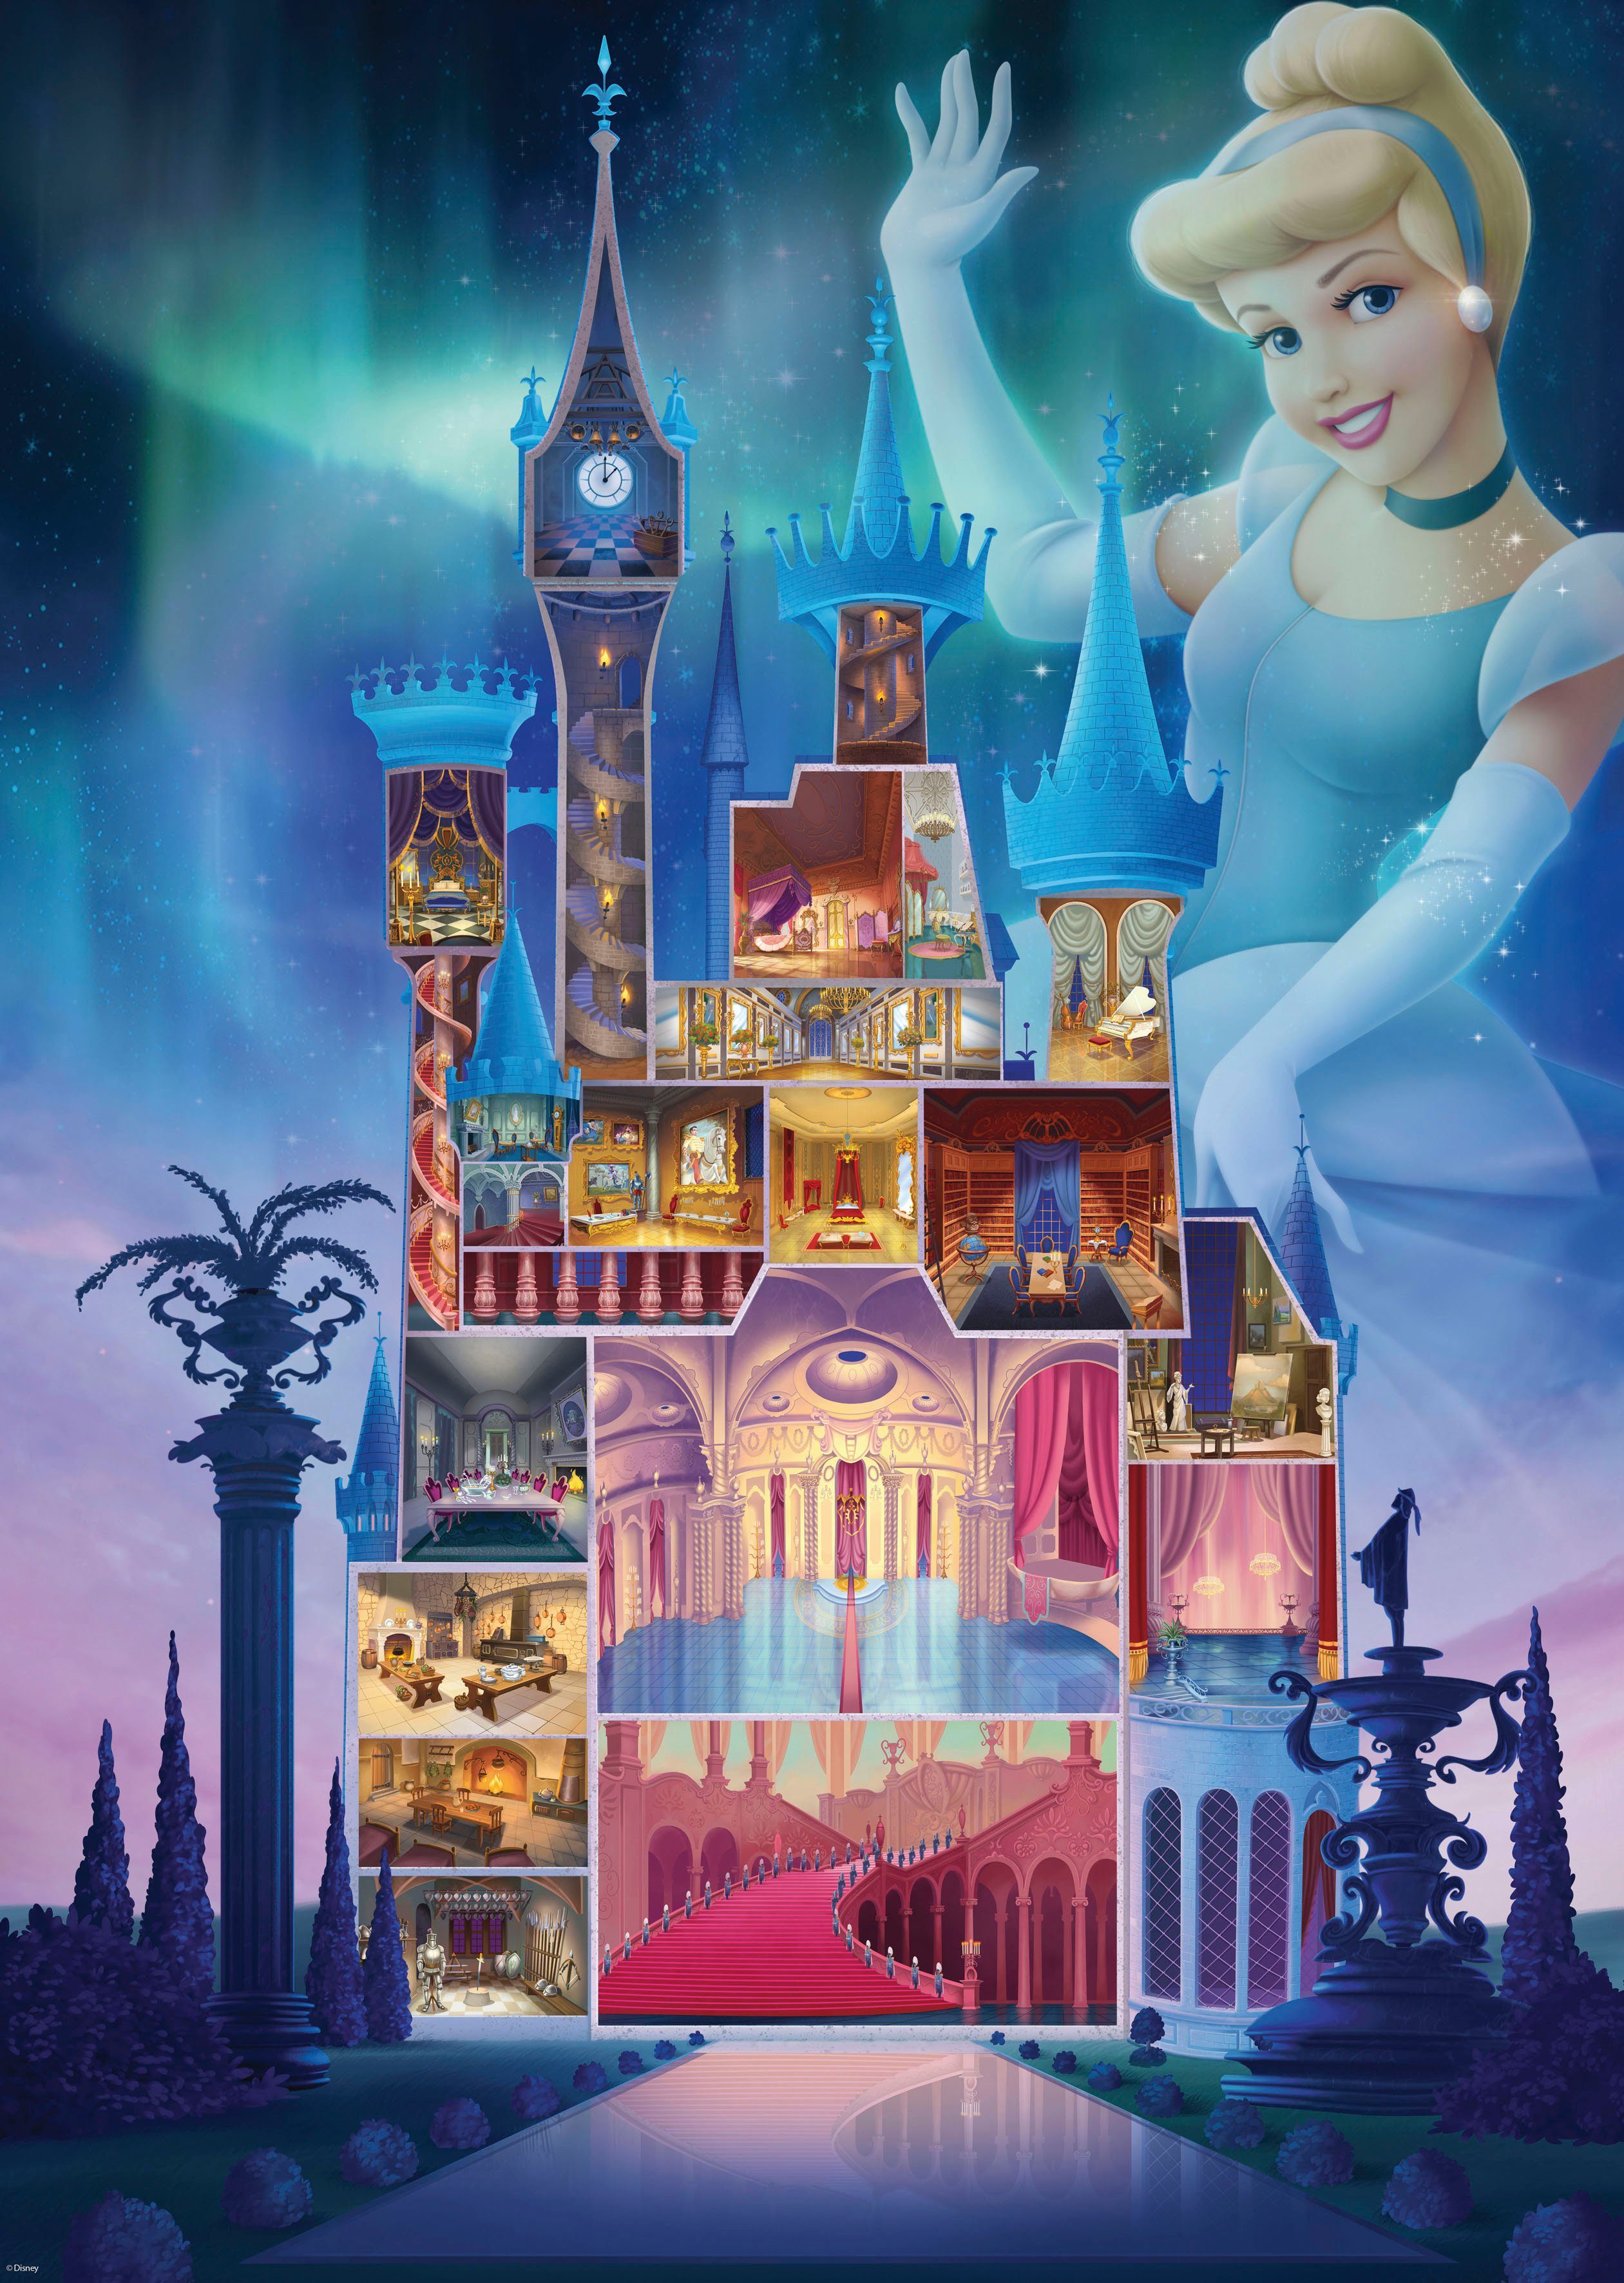 in Collection, Puzzleteile, Cinderella, Made Castle Ravensburger 1000 Germany Disney Puzzle